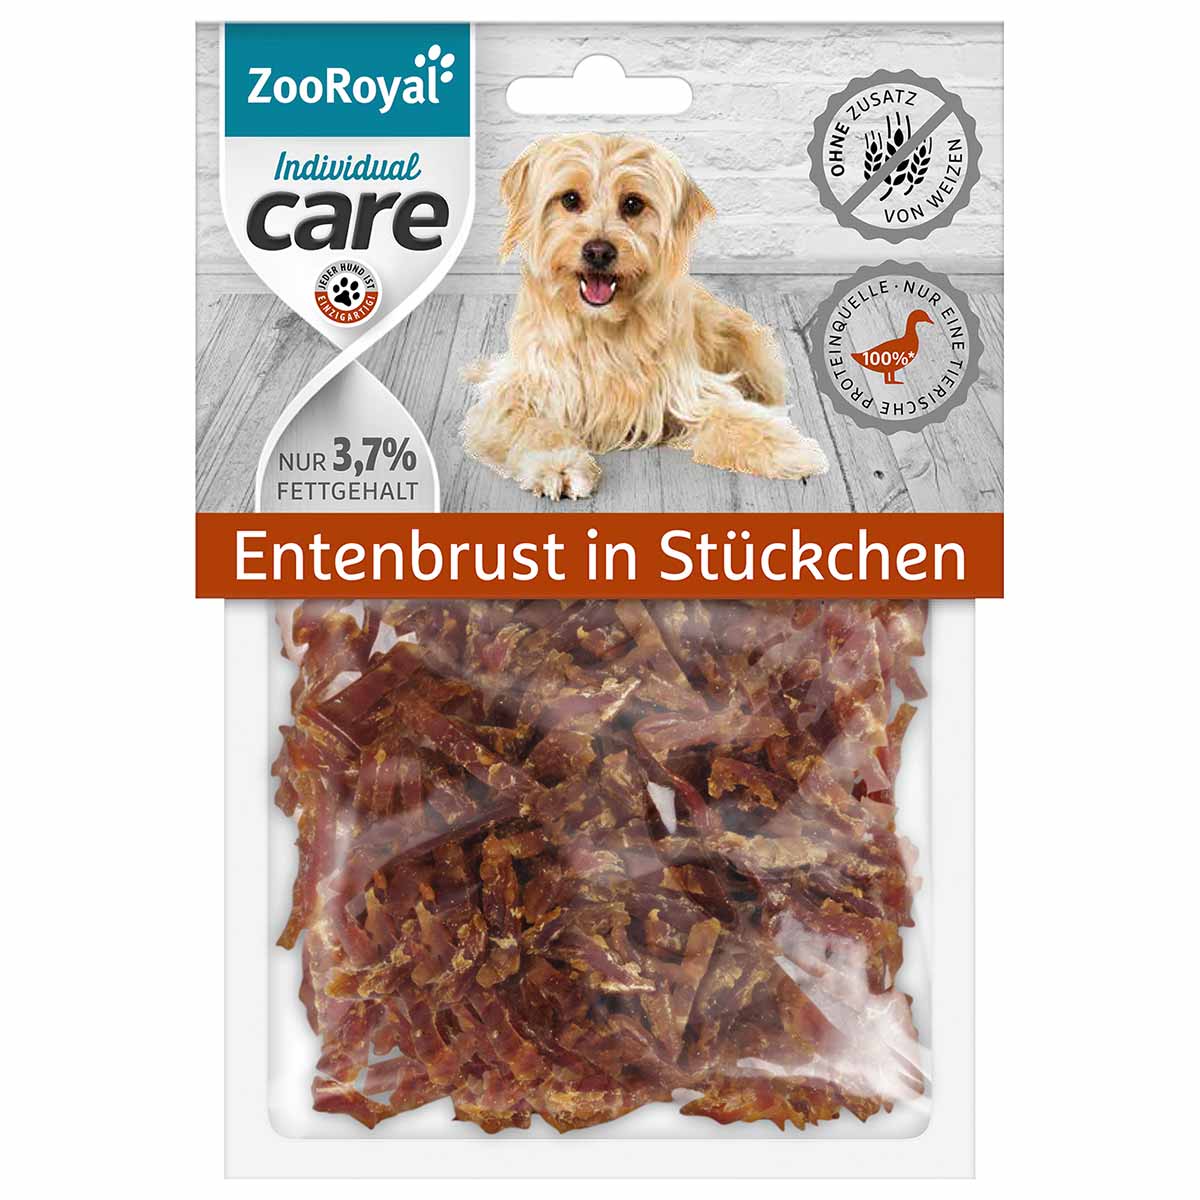 zooroyal individual care entenbrust in stueckchen 70g